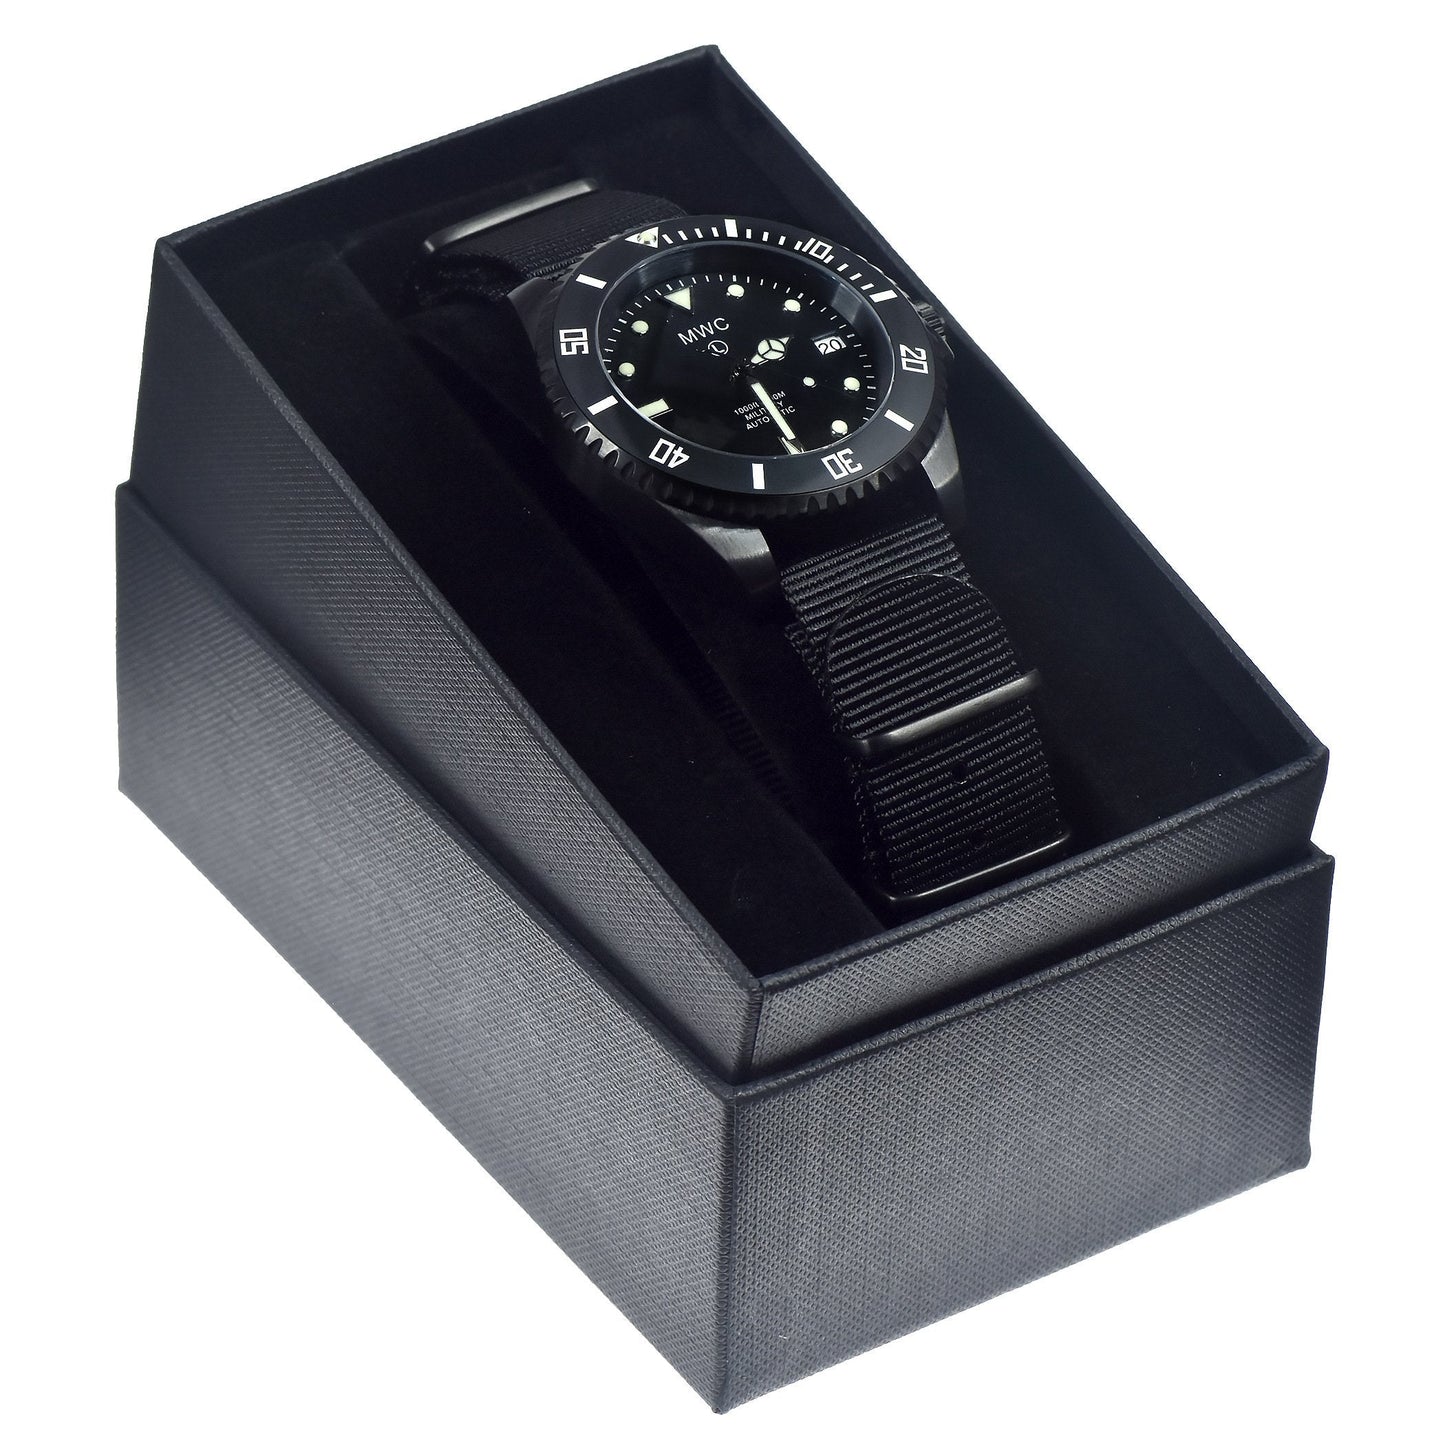 MWC 24 Jewel 300m Automatic Military Divers Watch in Black PVD Steel with Ceramic Bezel and Sapphire Crystal